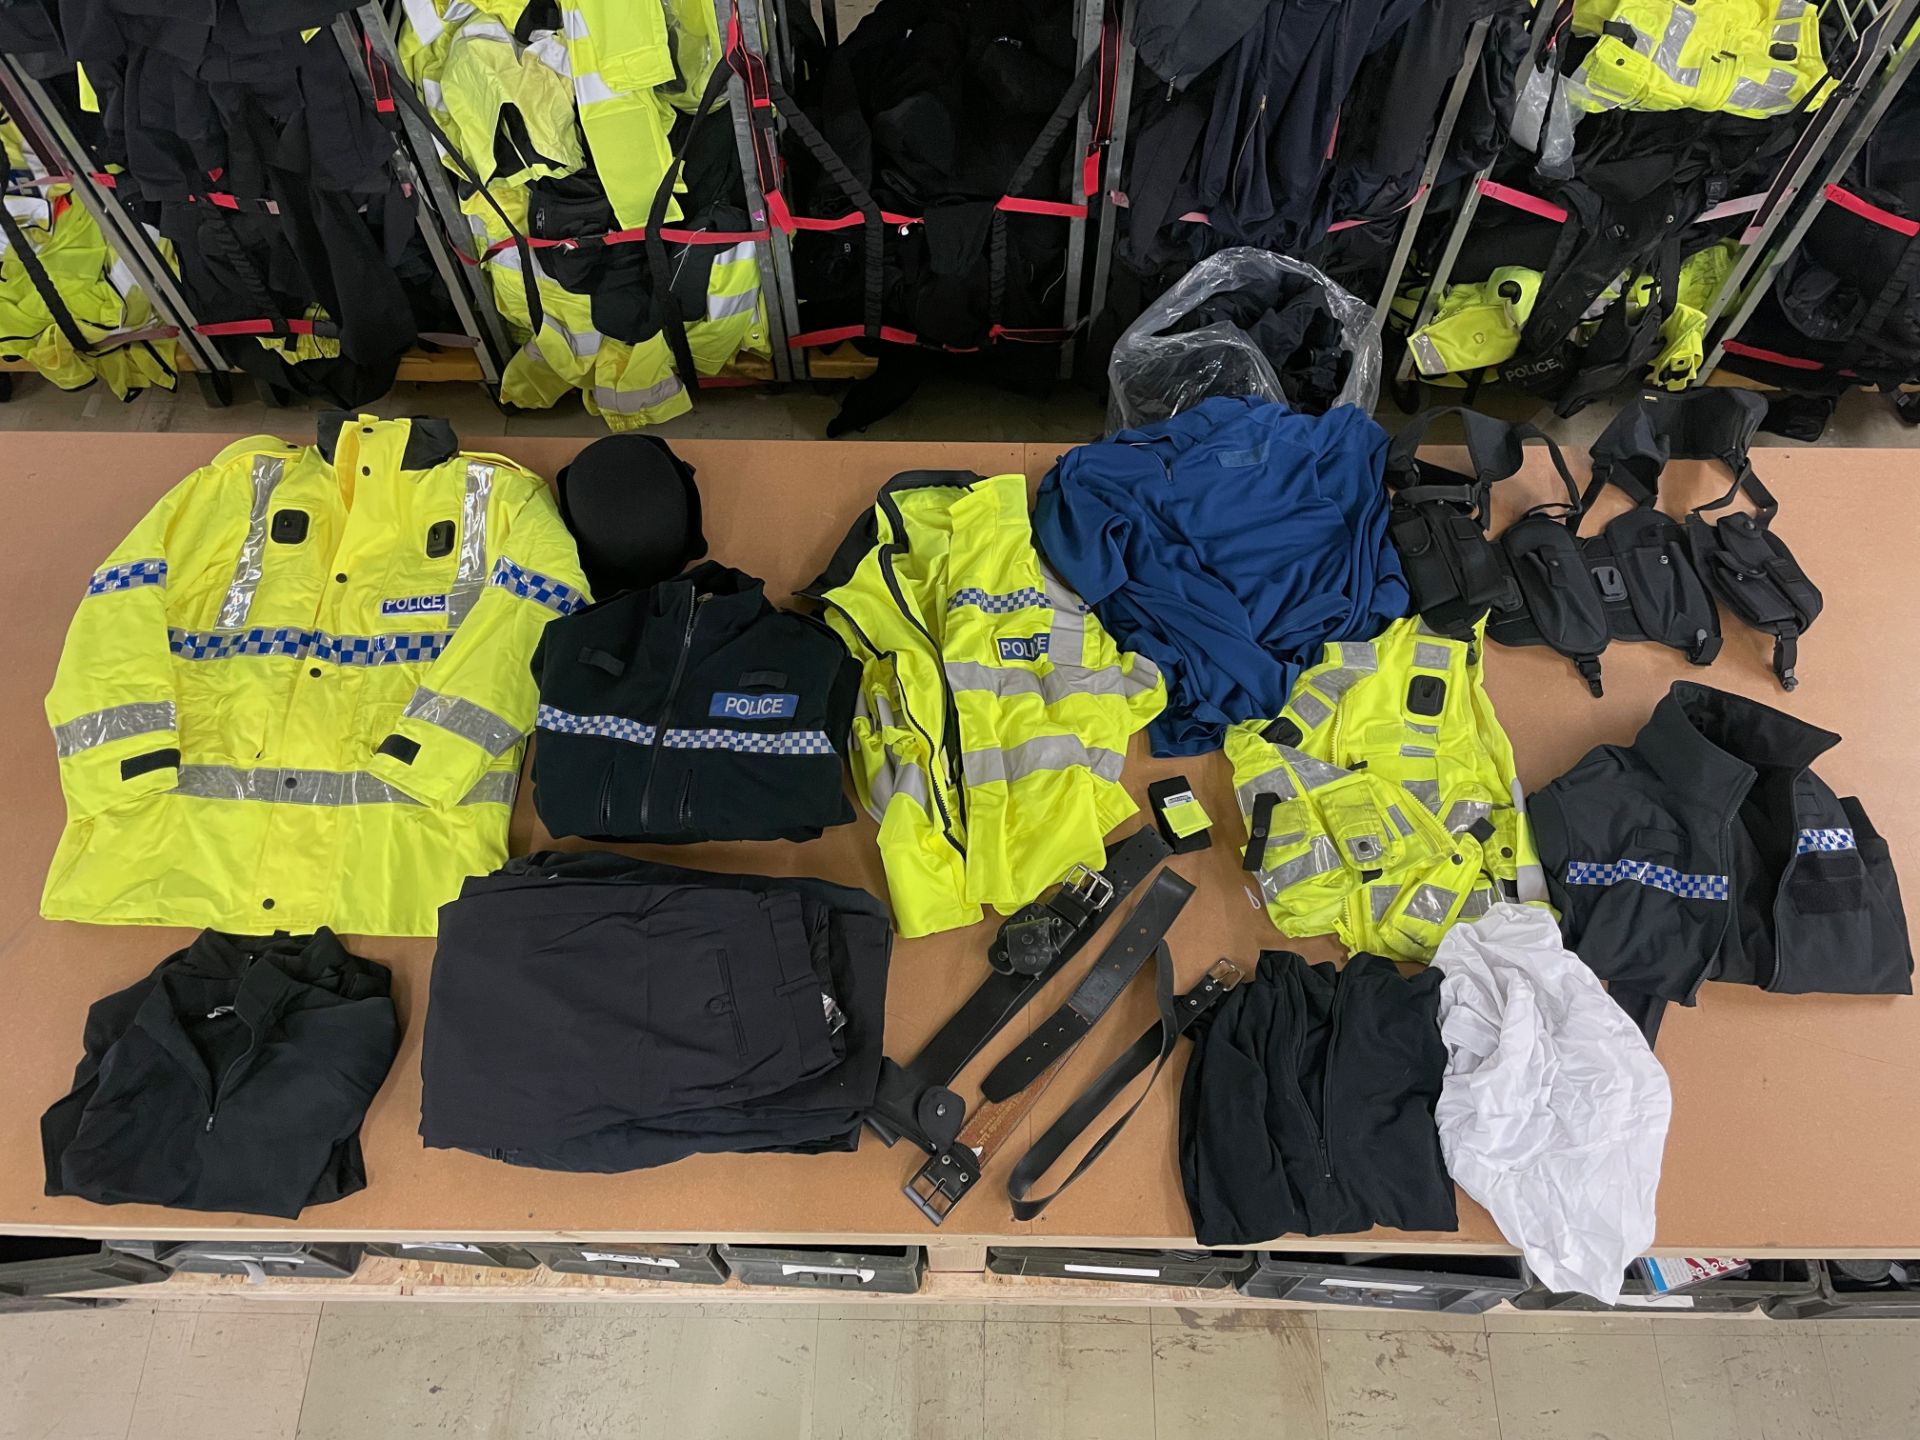 10 X BAGS OF EX POLICE CLOTHING - RRP £2750.00 - Image 11 of 12